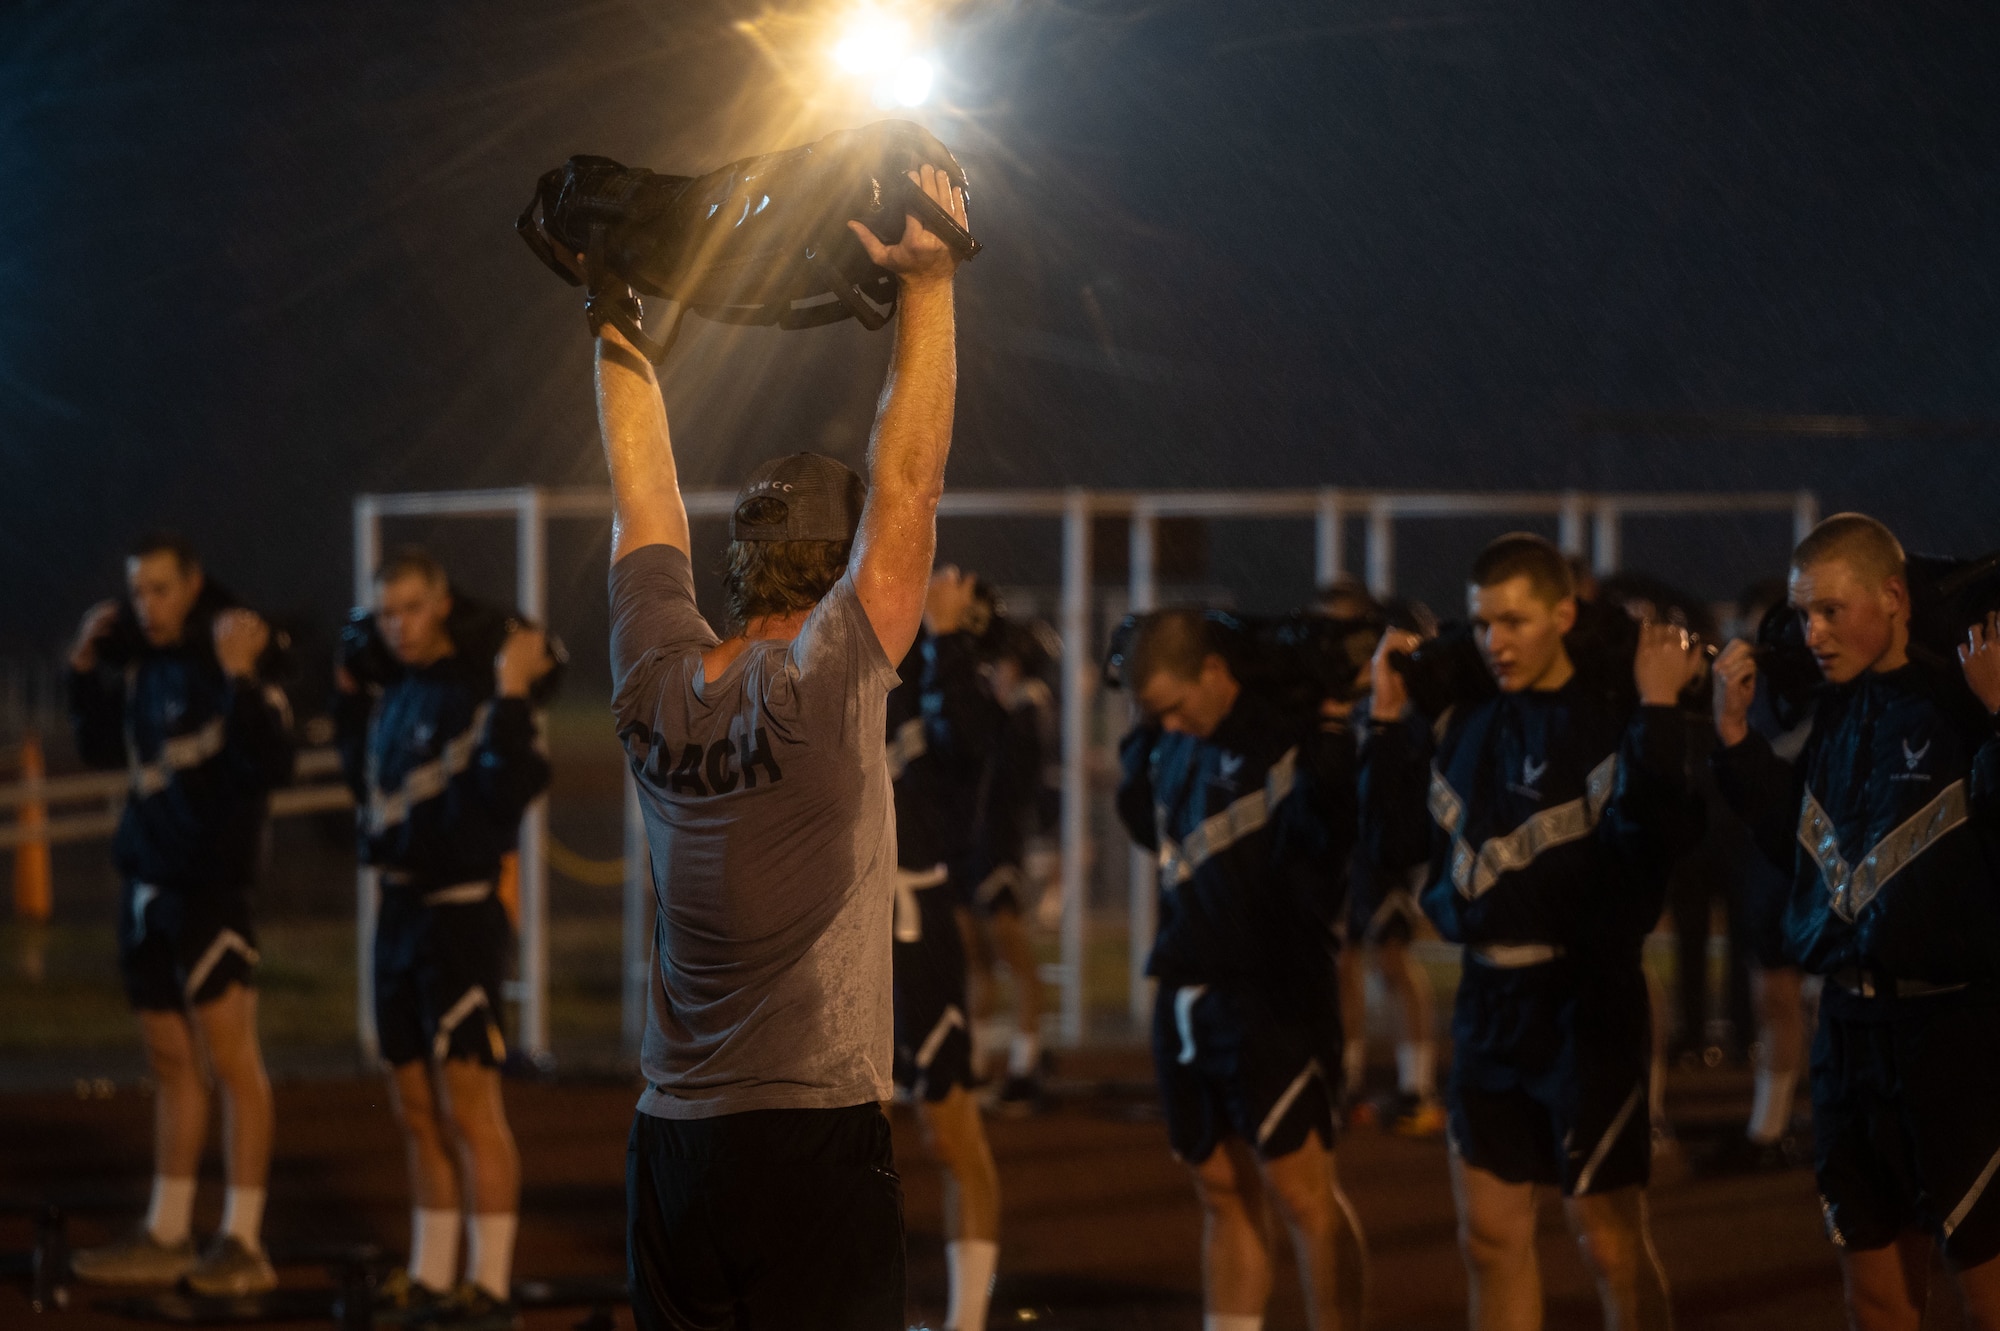 Coach demonstrates workout with weight over his head in front of group of students in the rain